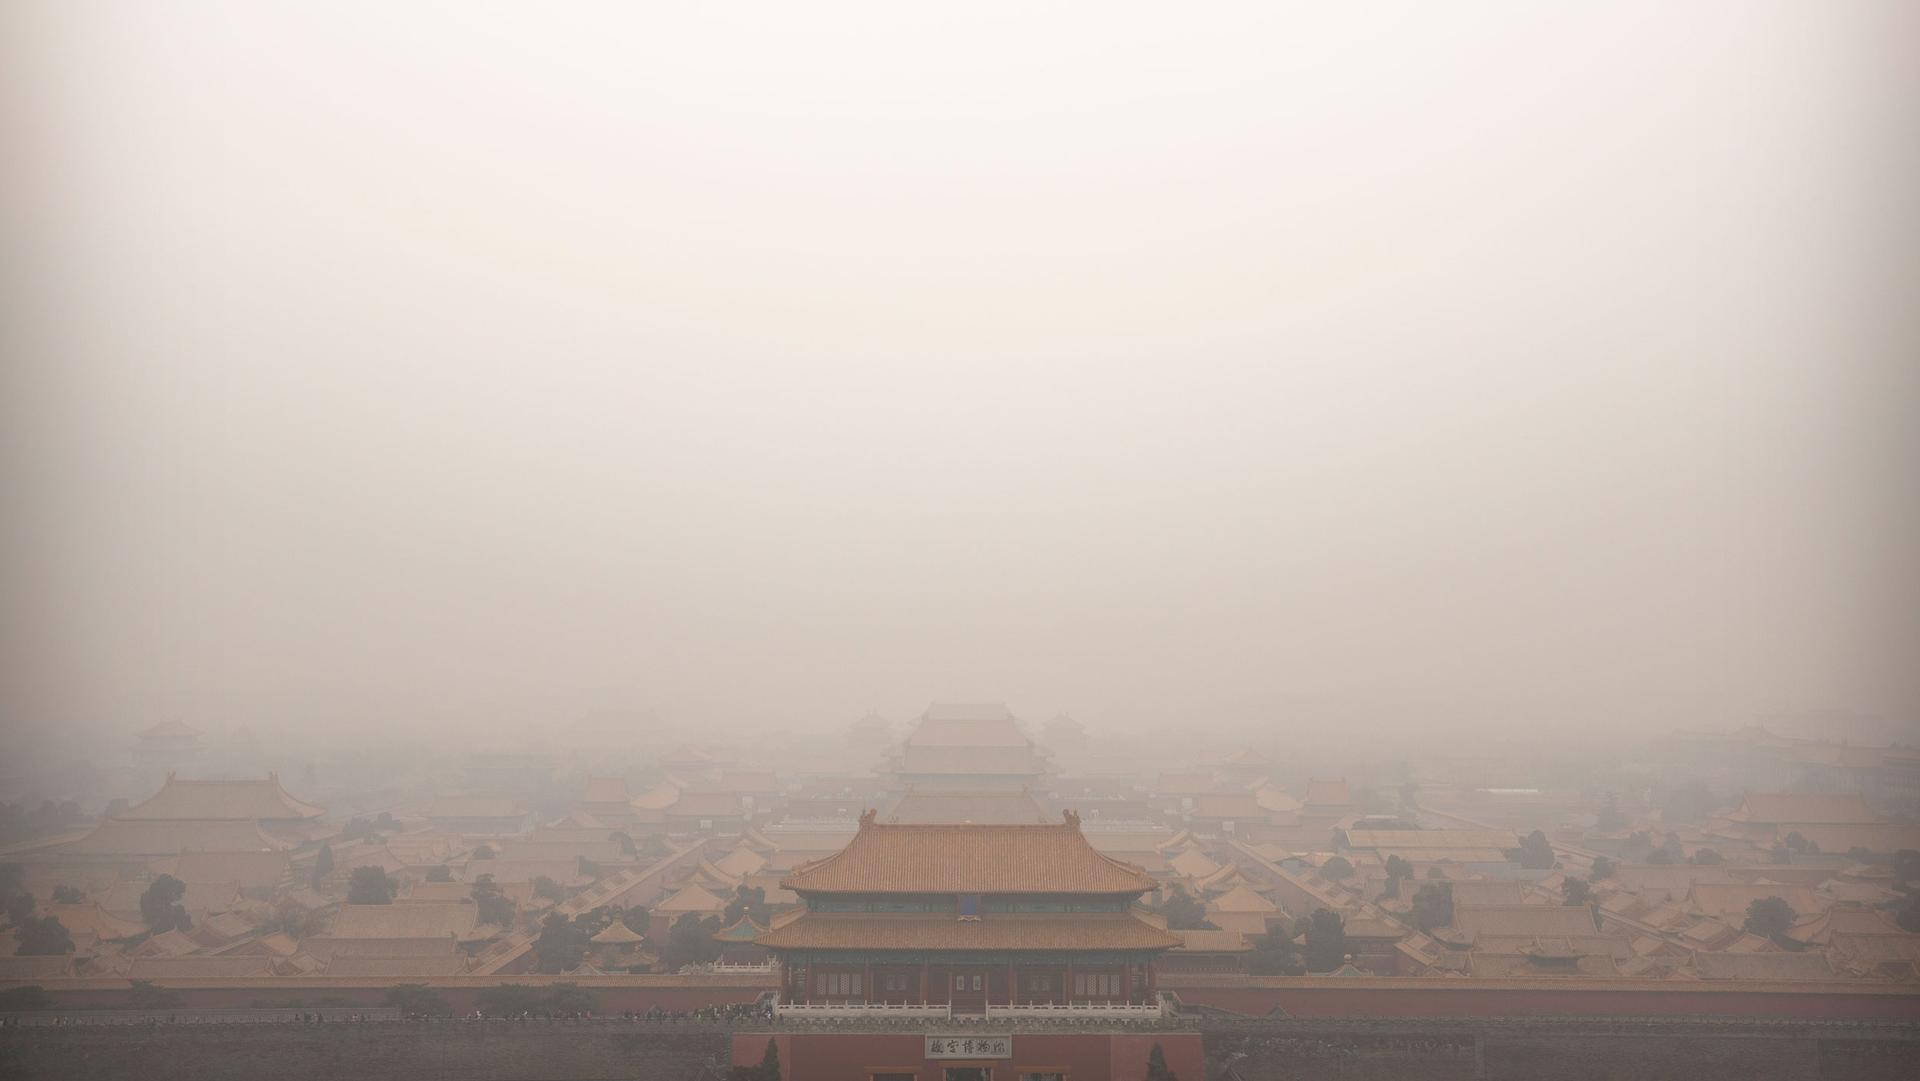 The top of a palace building in China's Forbidden City is barely viewable in a photograph showing a dense amount of smog.